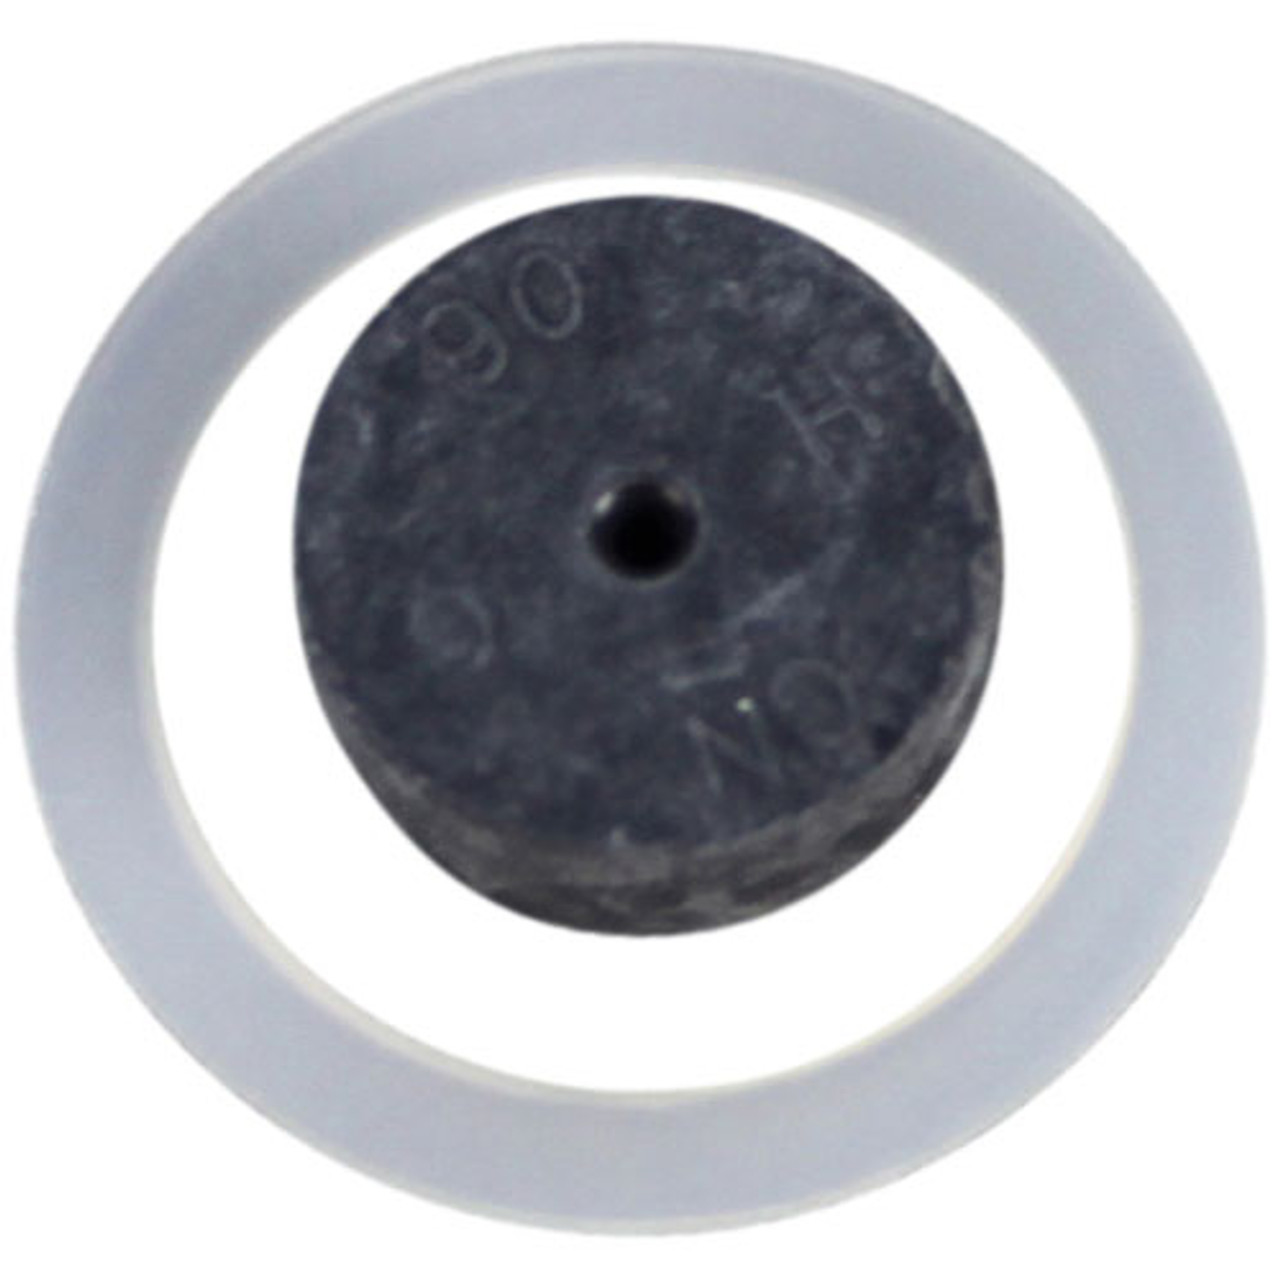 Washer/Gasket Set - Replacement Part For Bunn 20526.1222